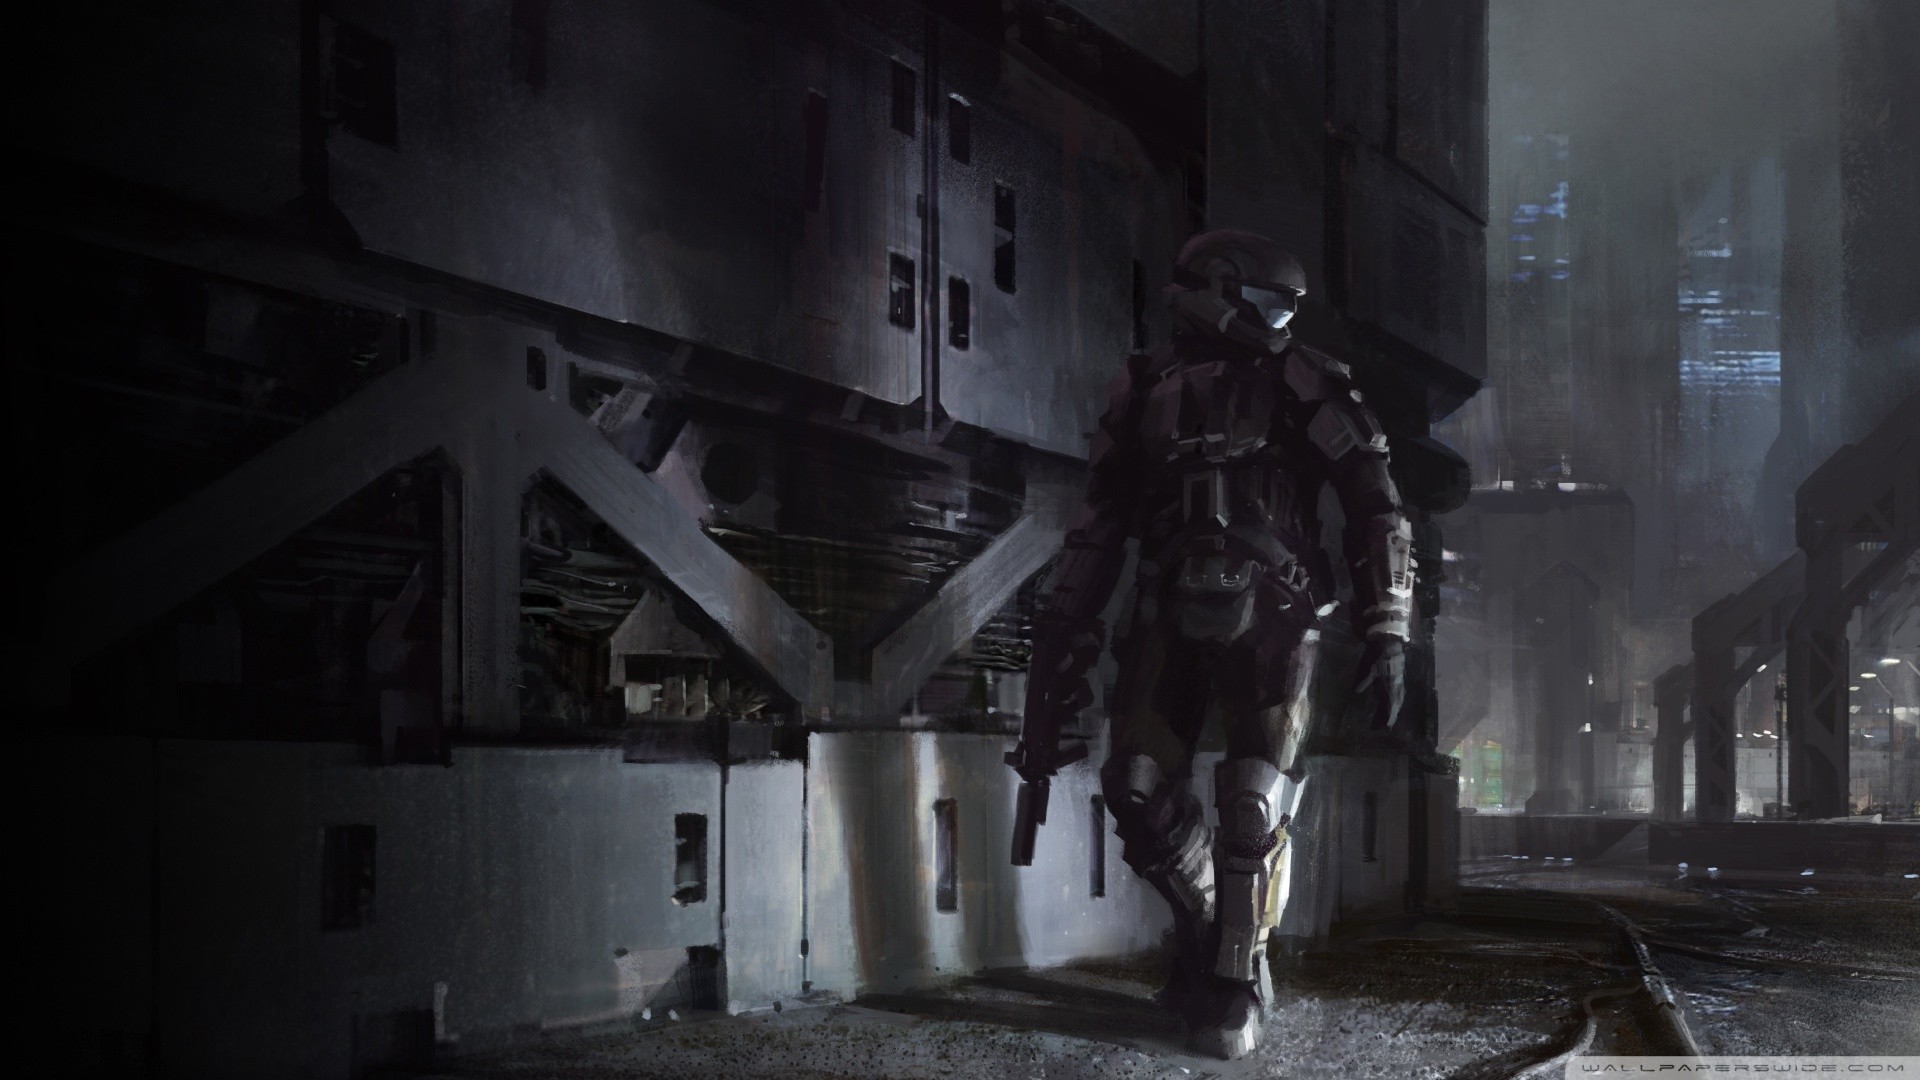 Halo 3 ODST Wallpapers  Wallpaper Cave